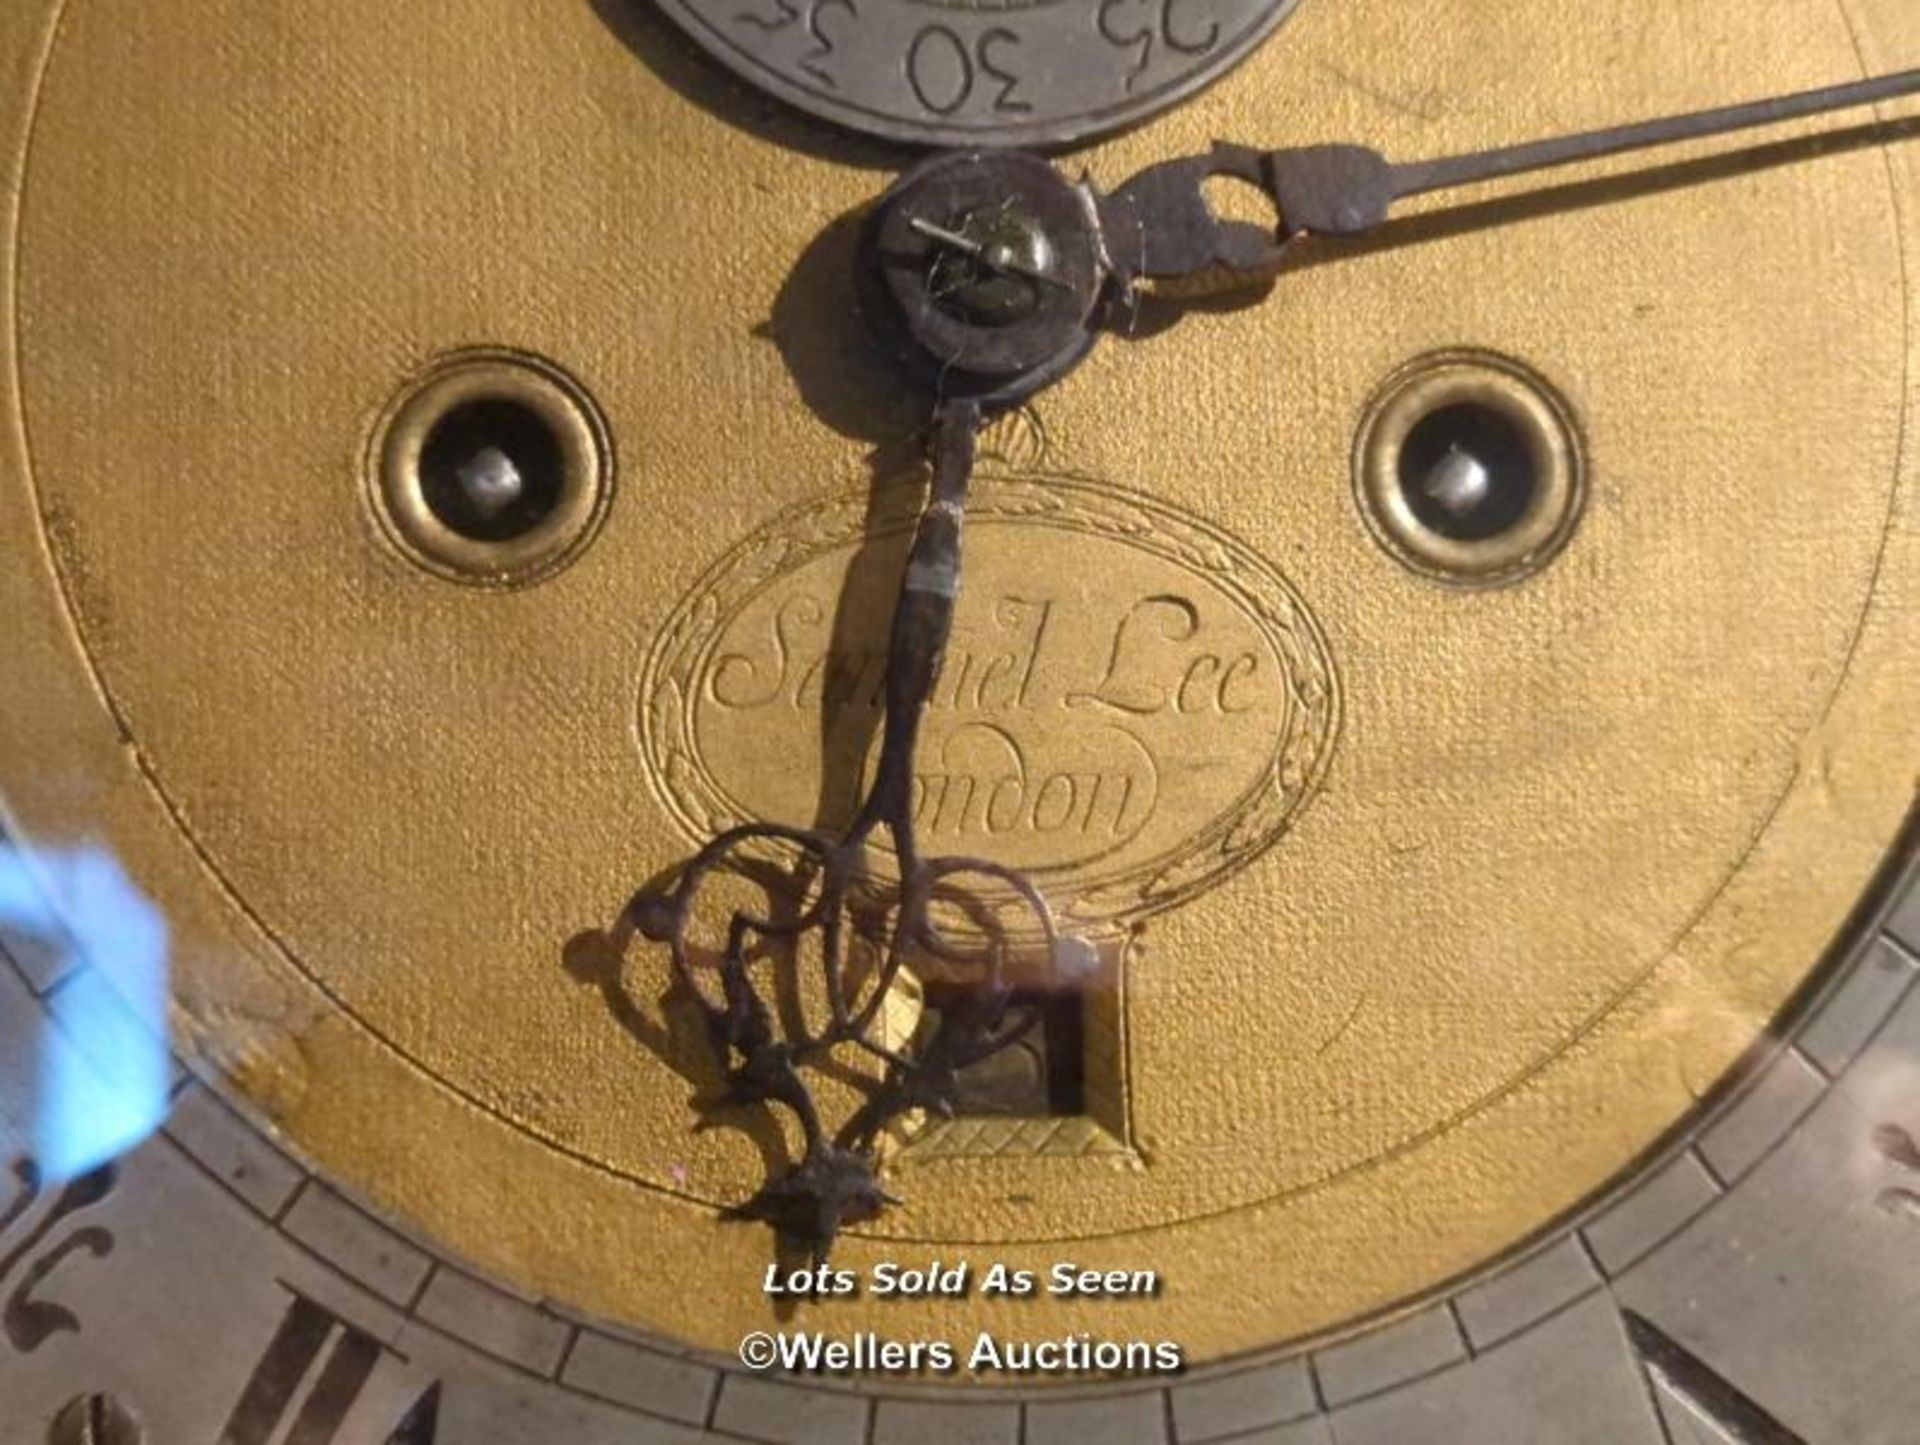 *18TH CENTURY 8 DAY OAK LONGCASE CLOCK, DIAL SIGNED SAMUEL LEE, LONDON, 215CM / LOCATED AT - Image 3 of 5